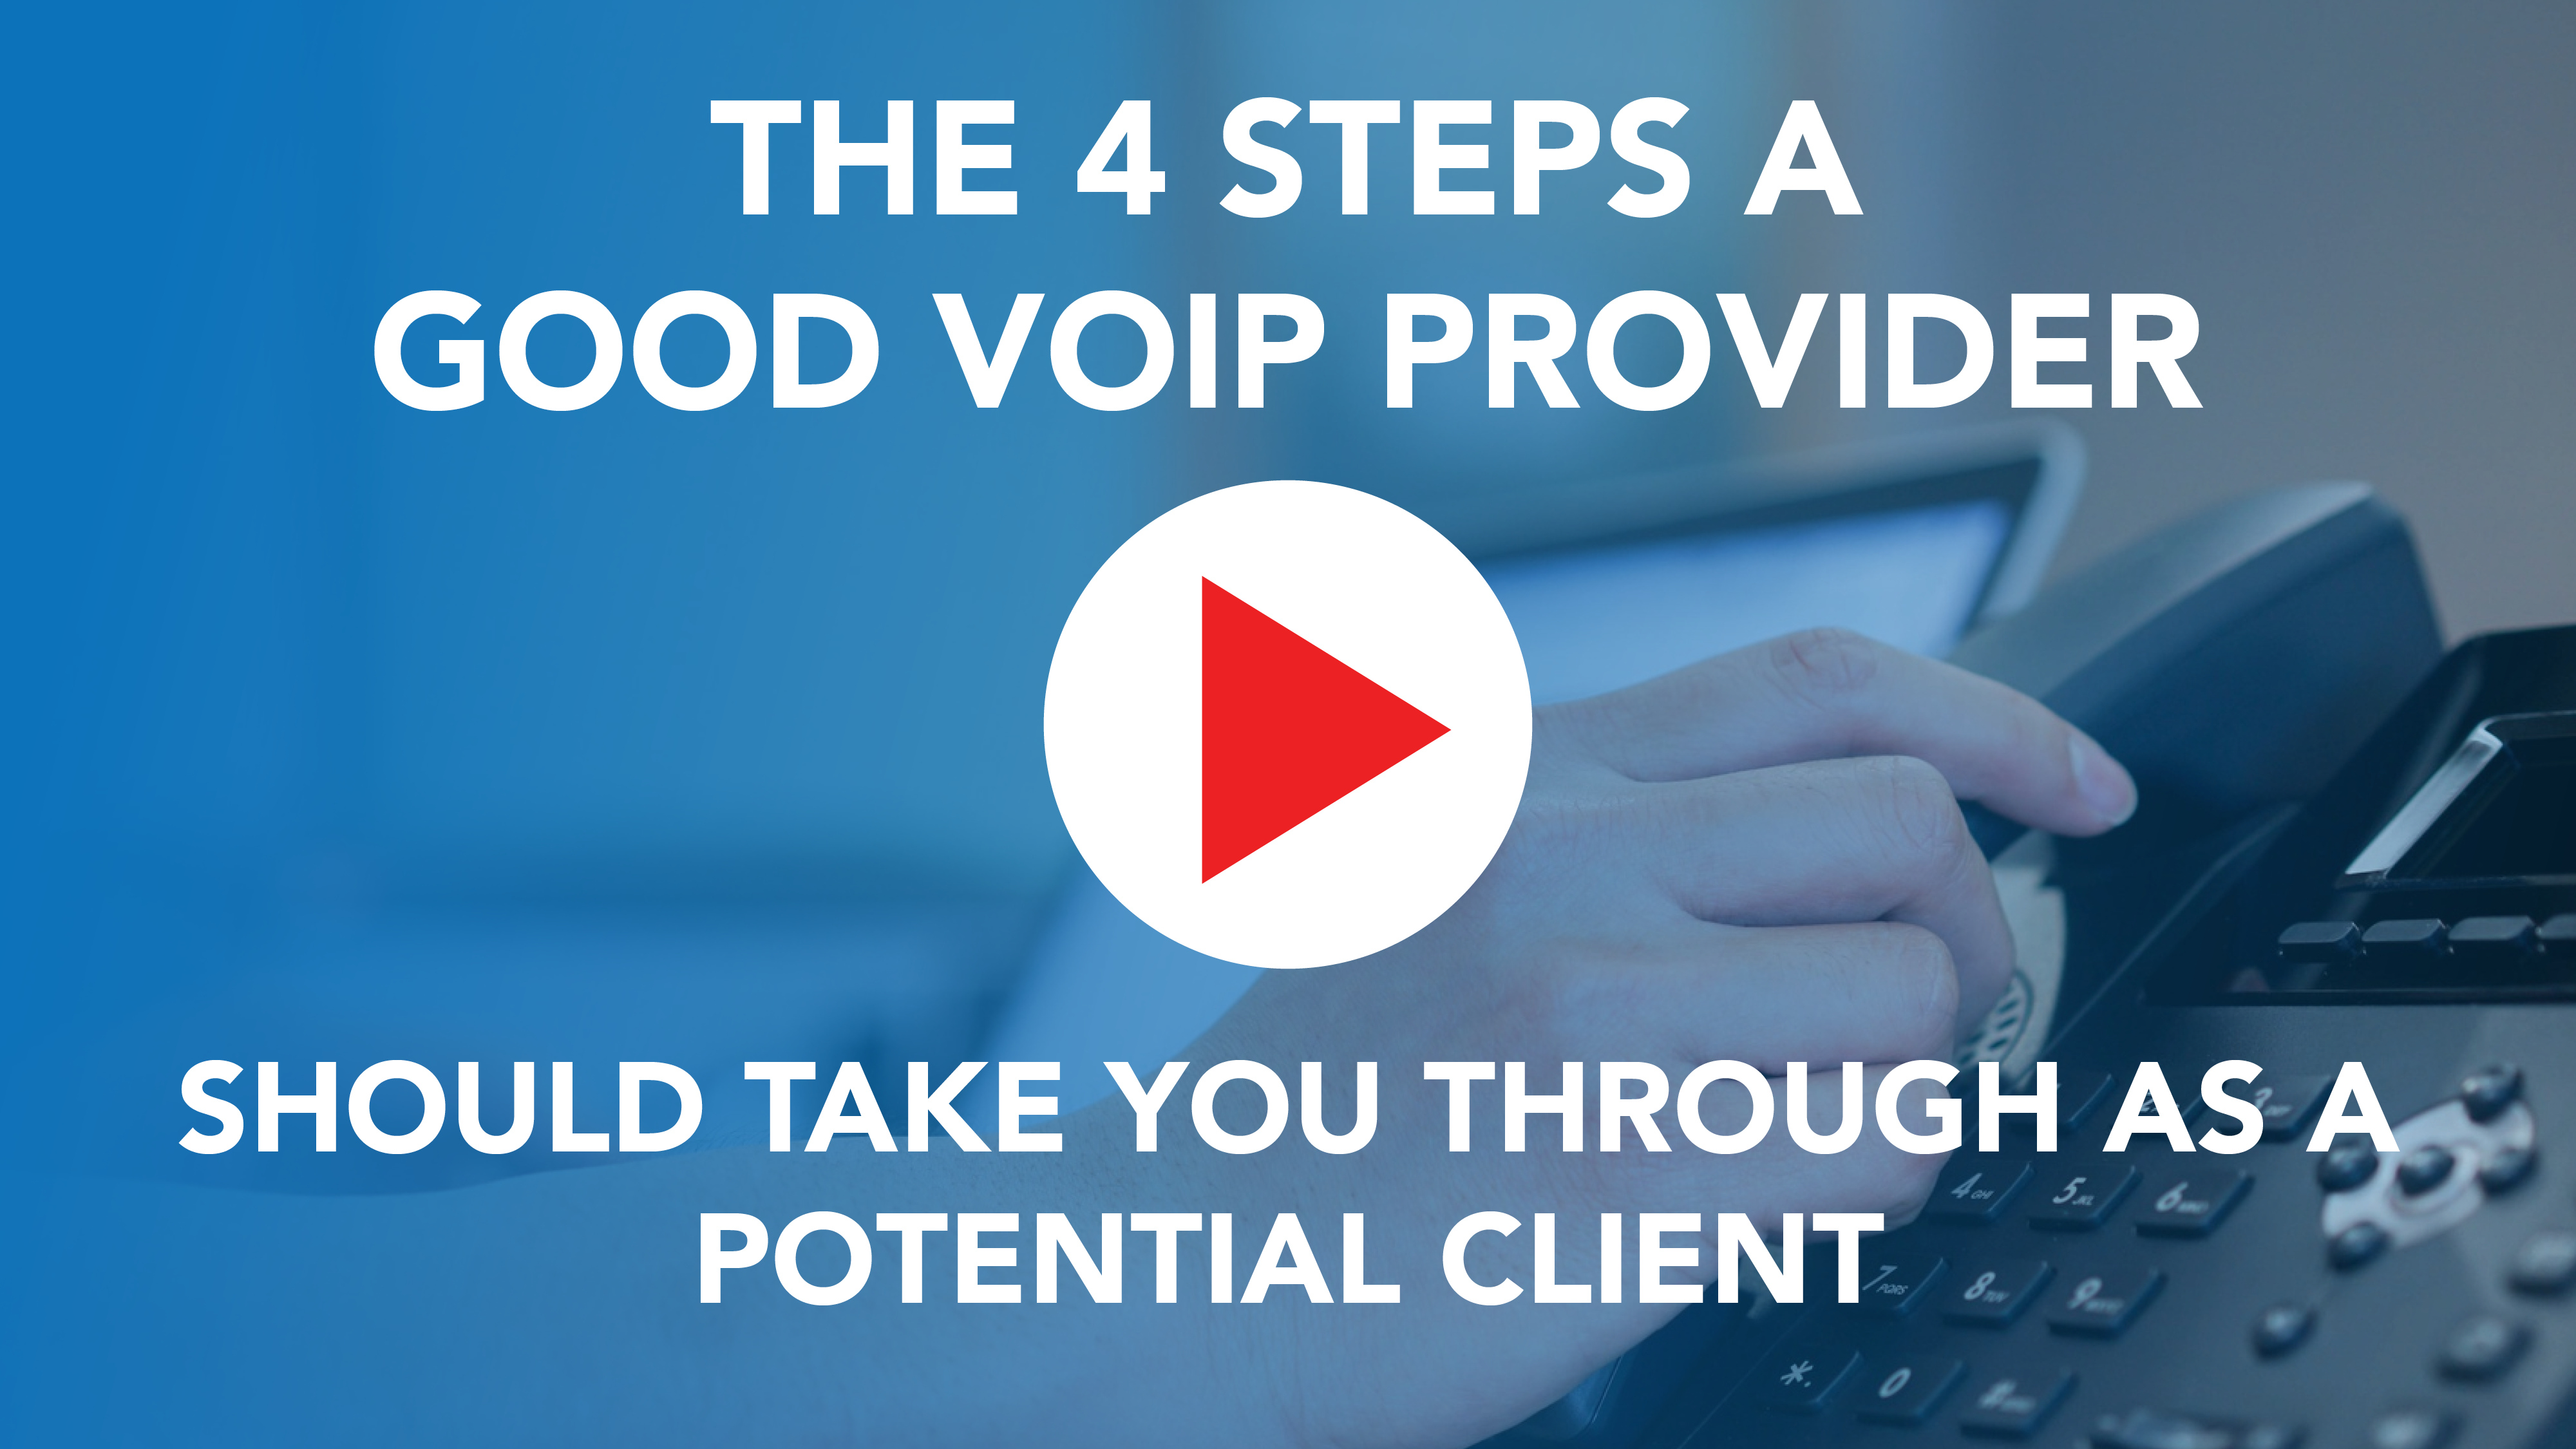 The 4 Steps a Good VoIP Provider Should Take You Through as a Potential Client